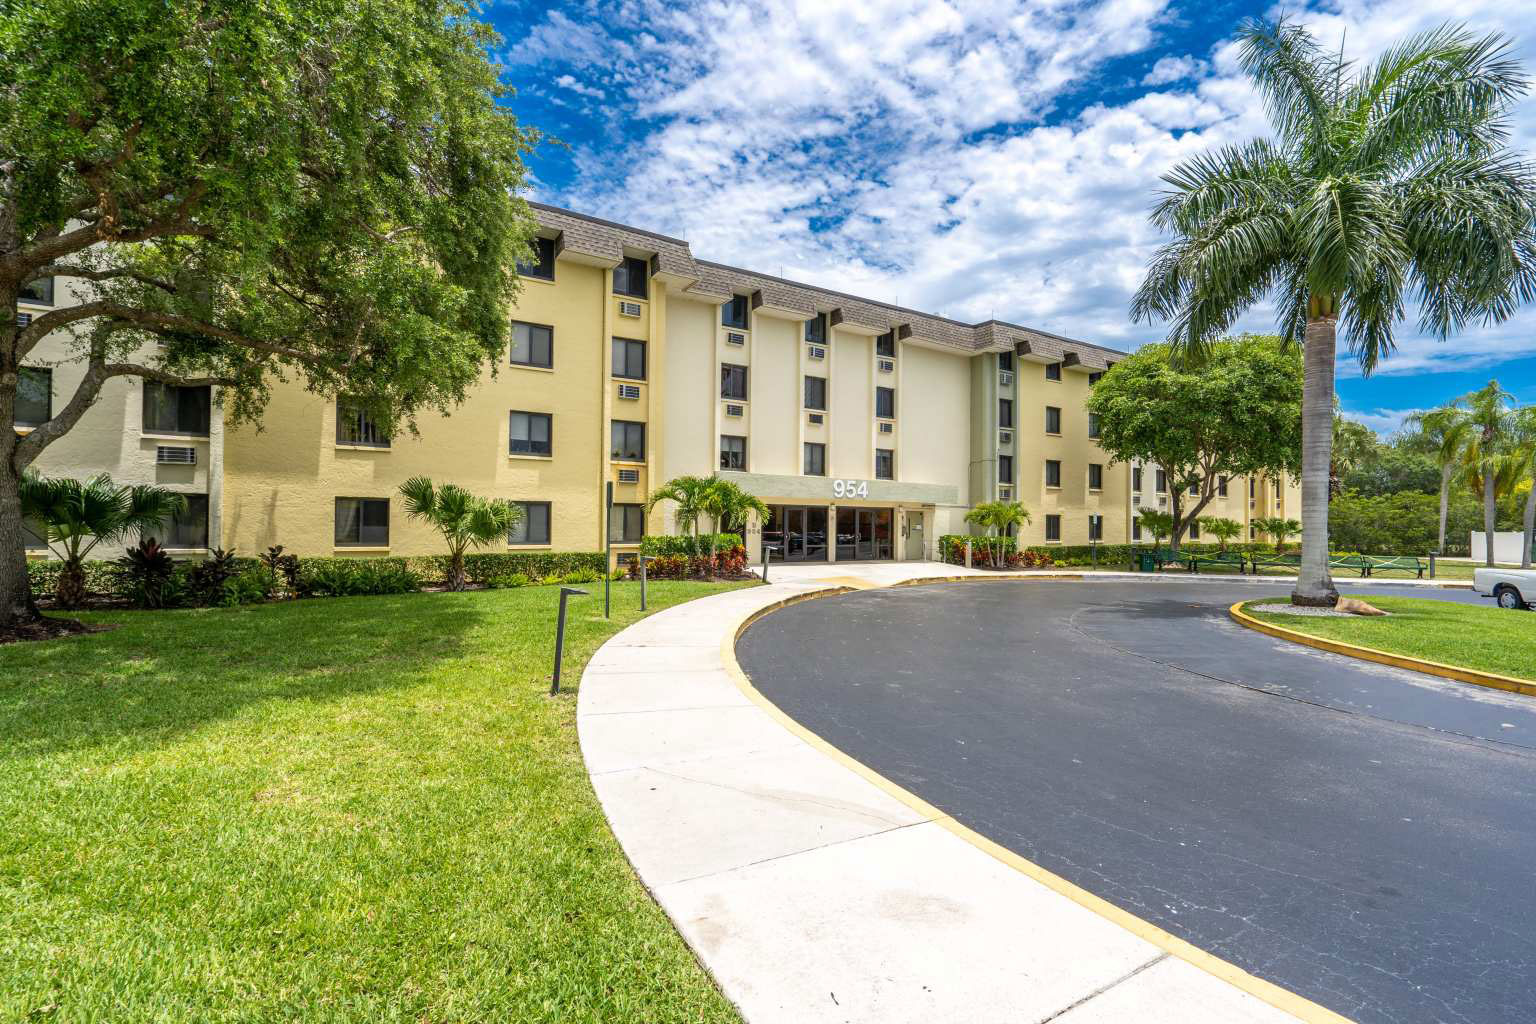 A photo of the front entrance of Goodlette Arms Apartments in Naples Florida